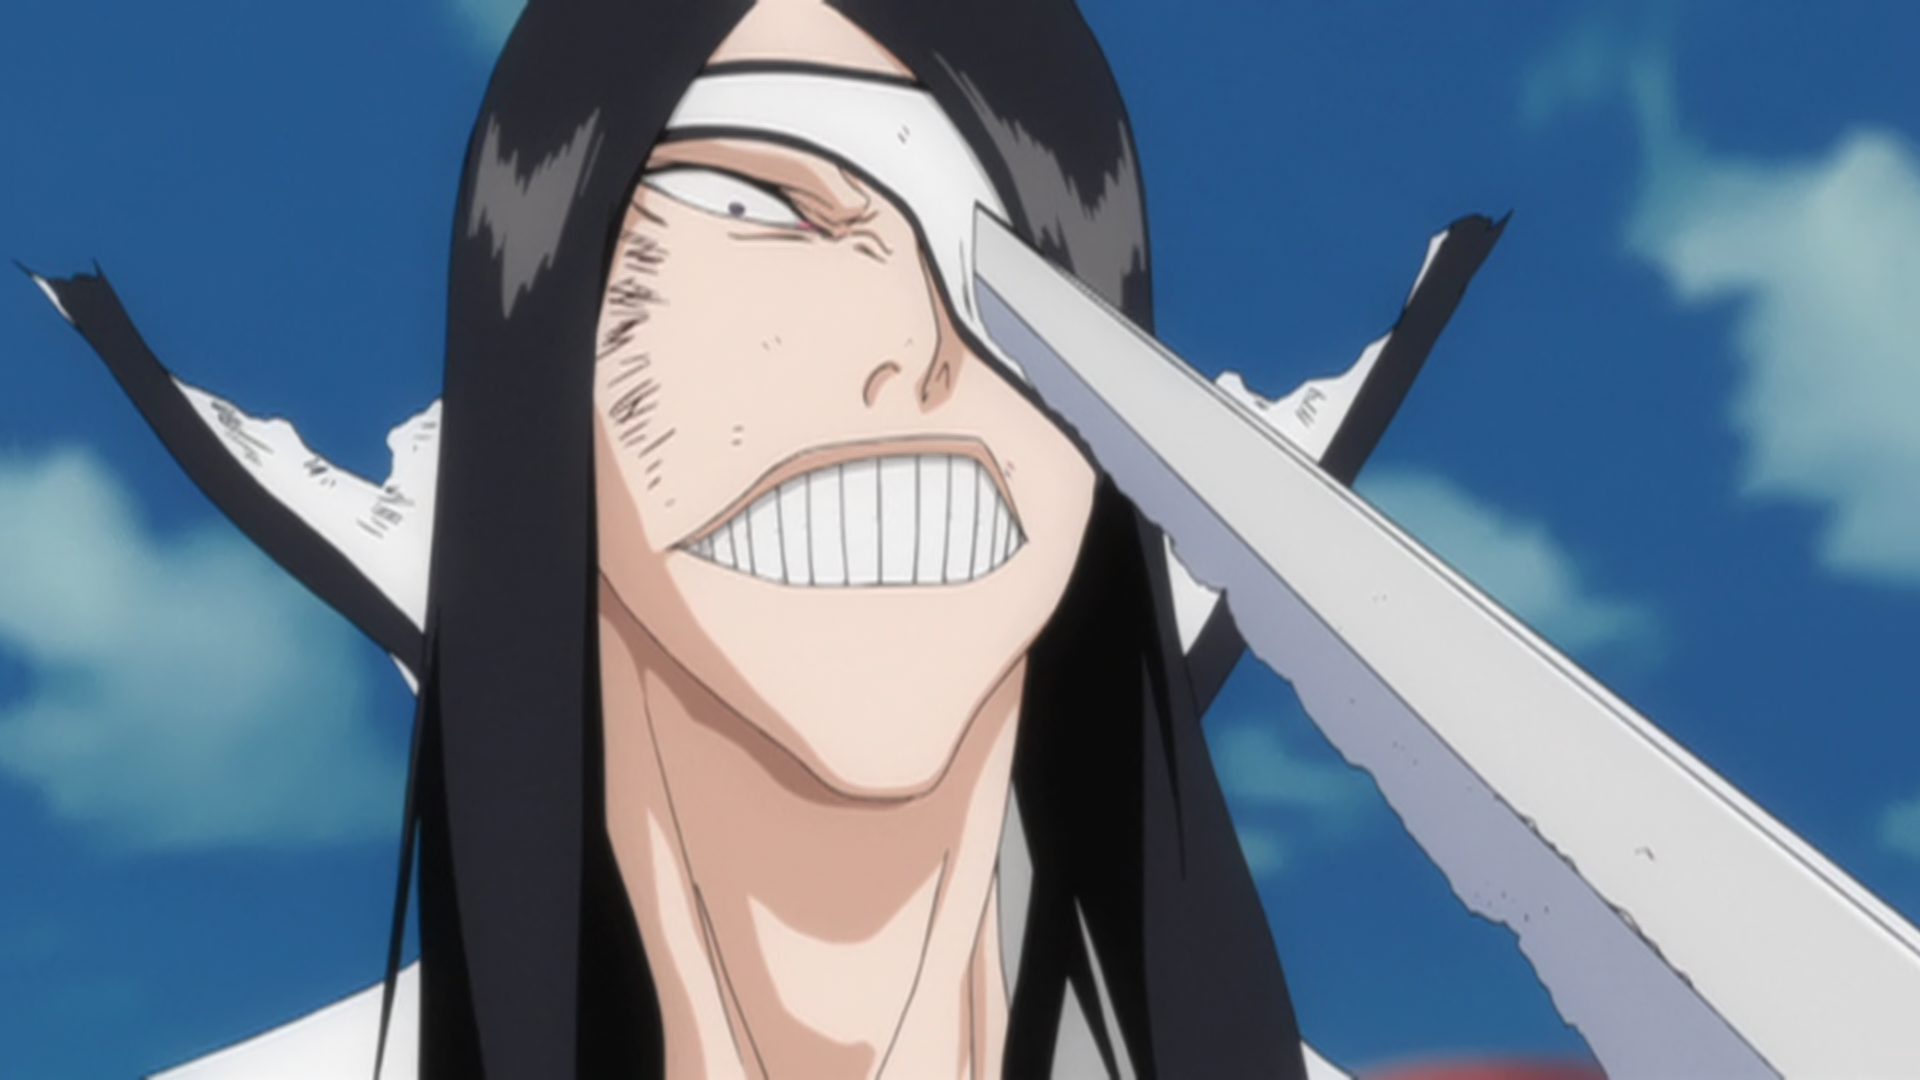 -http://images1.wikia.nocookie.net/__cb20120315214455/bleach/en/images/3/38/NnoitraApparentlyStabbed.png